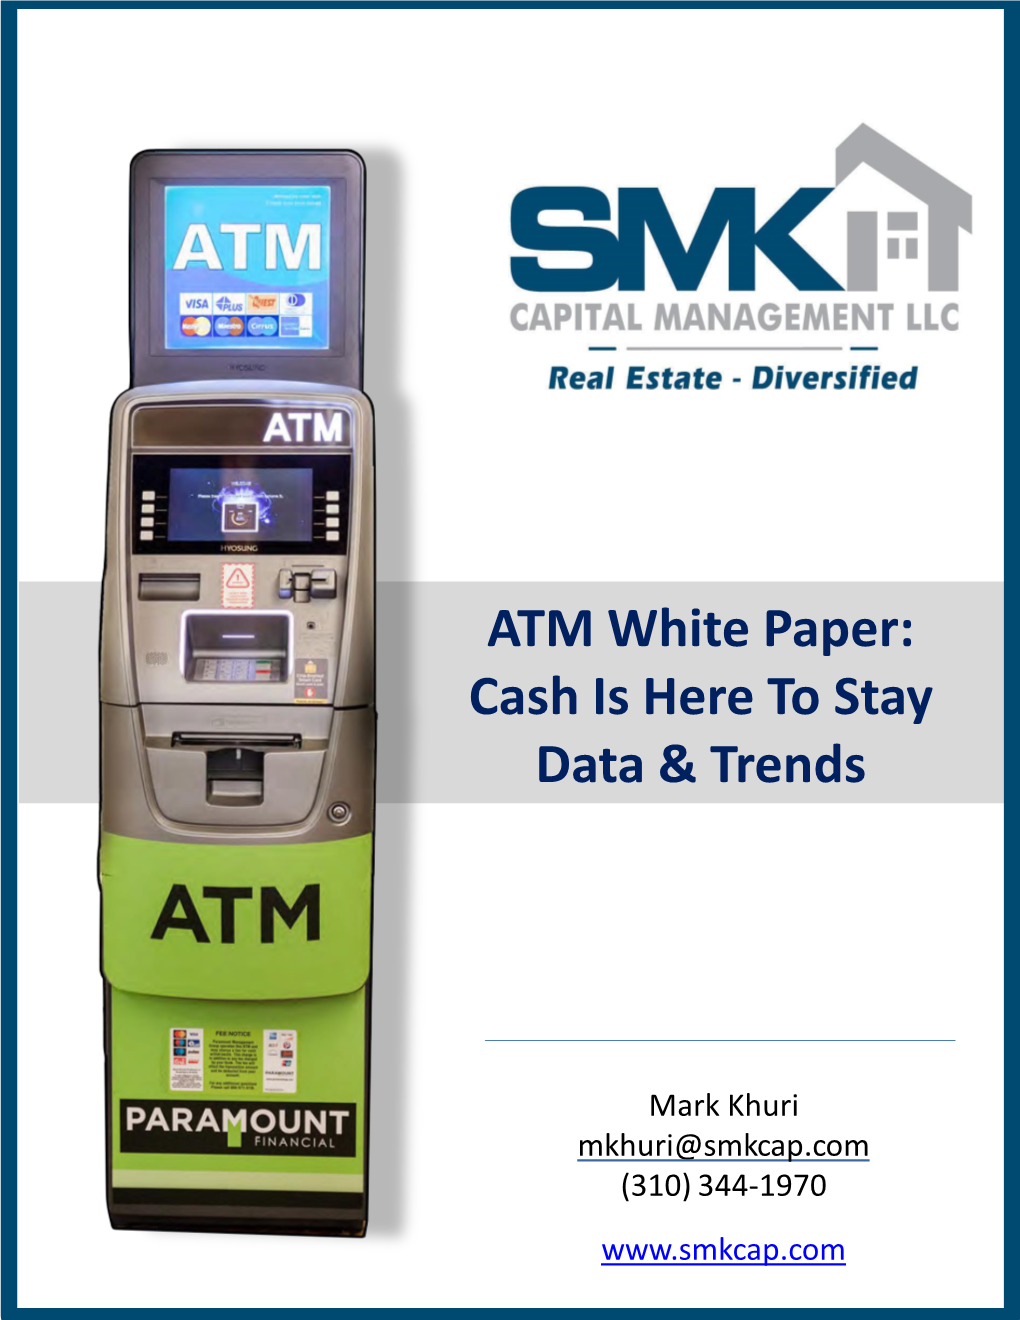 ATM White Paper: Cash Is Here to Stay Data & Trends